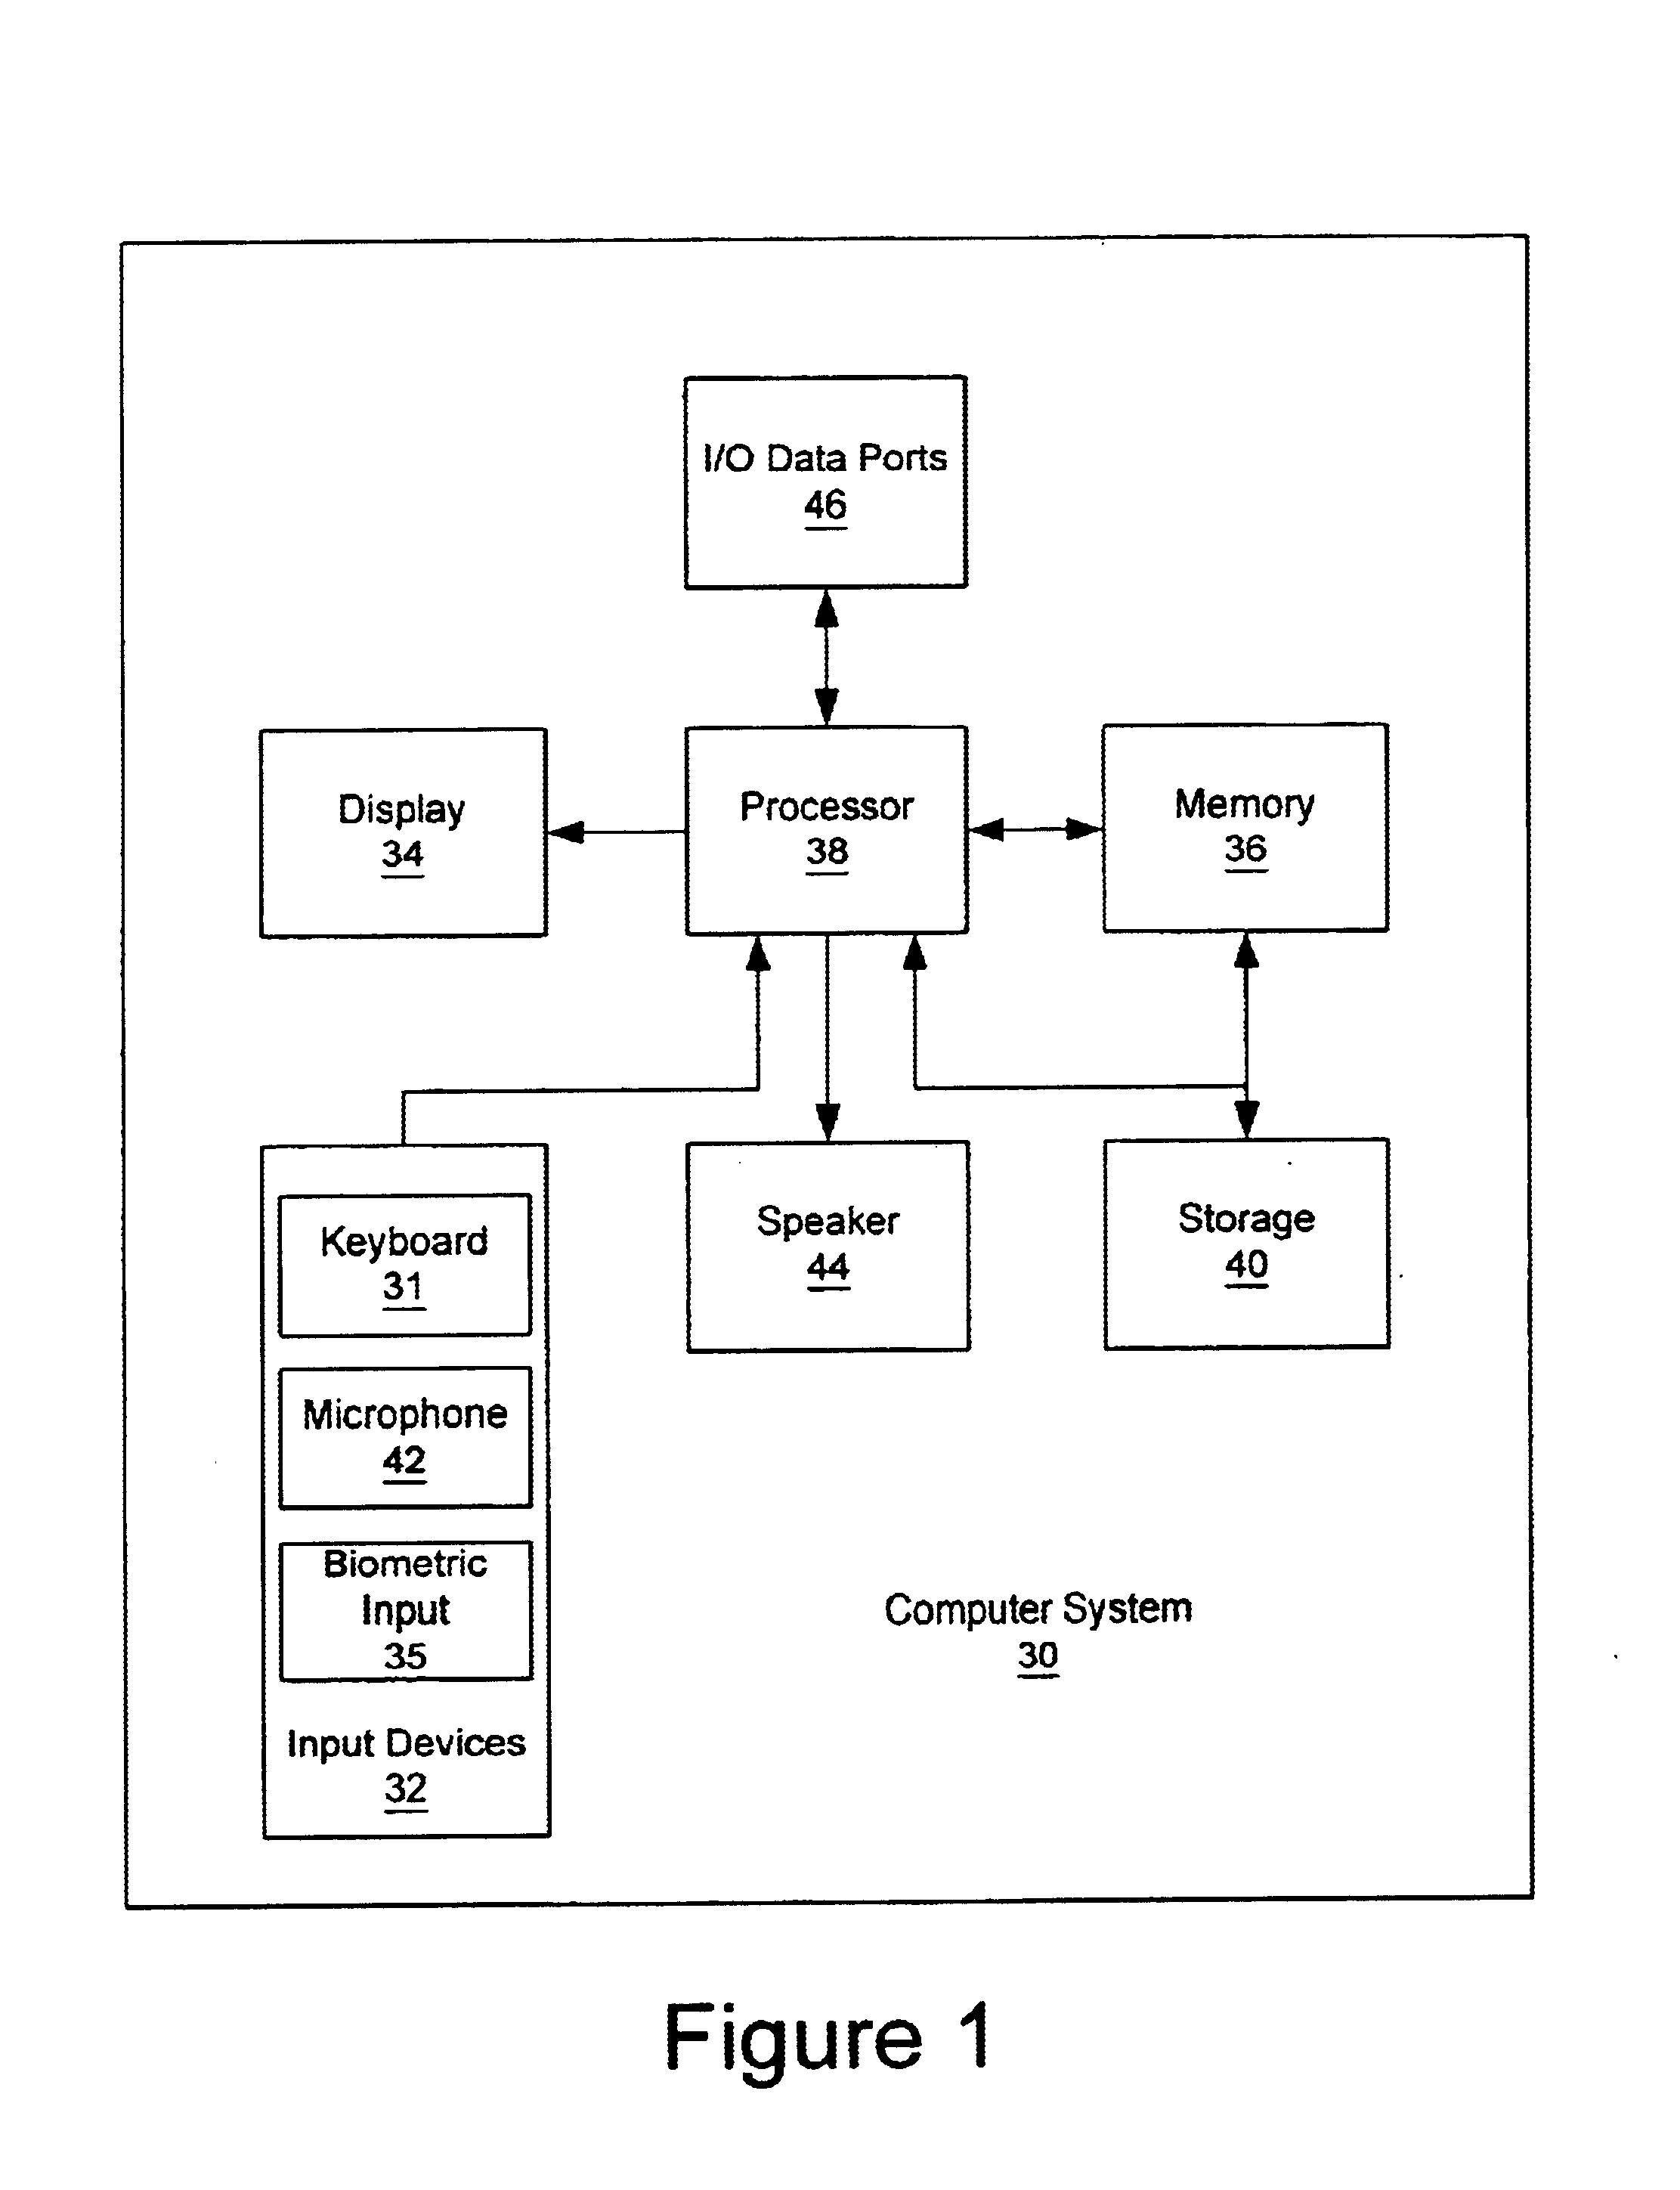 Methods, systems and computer program products for generating user-dependent RSA values without storing seeds